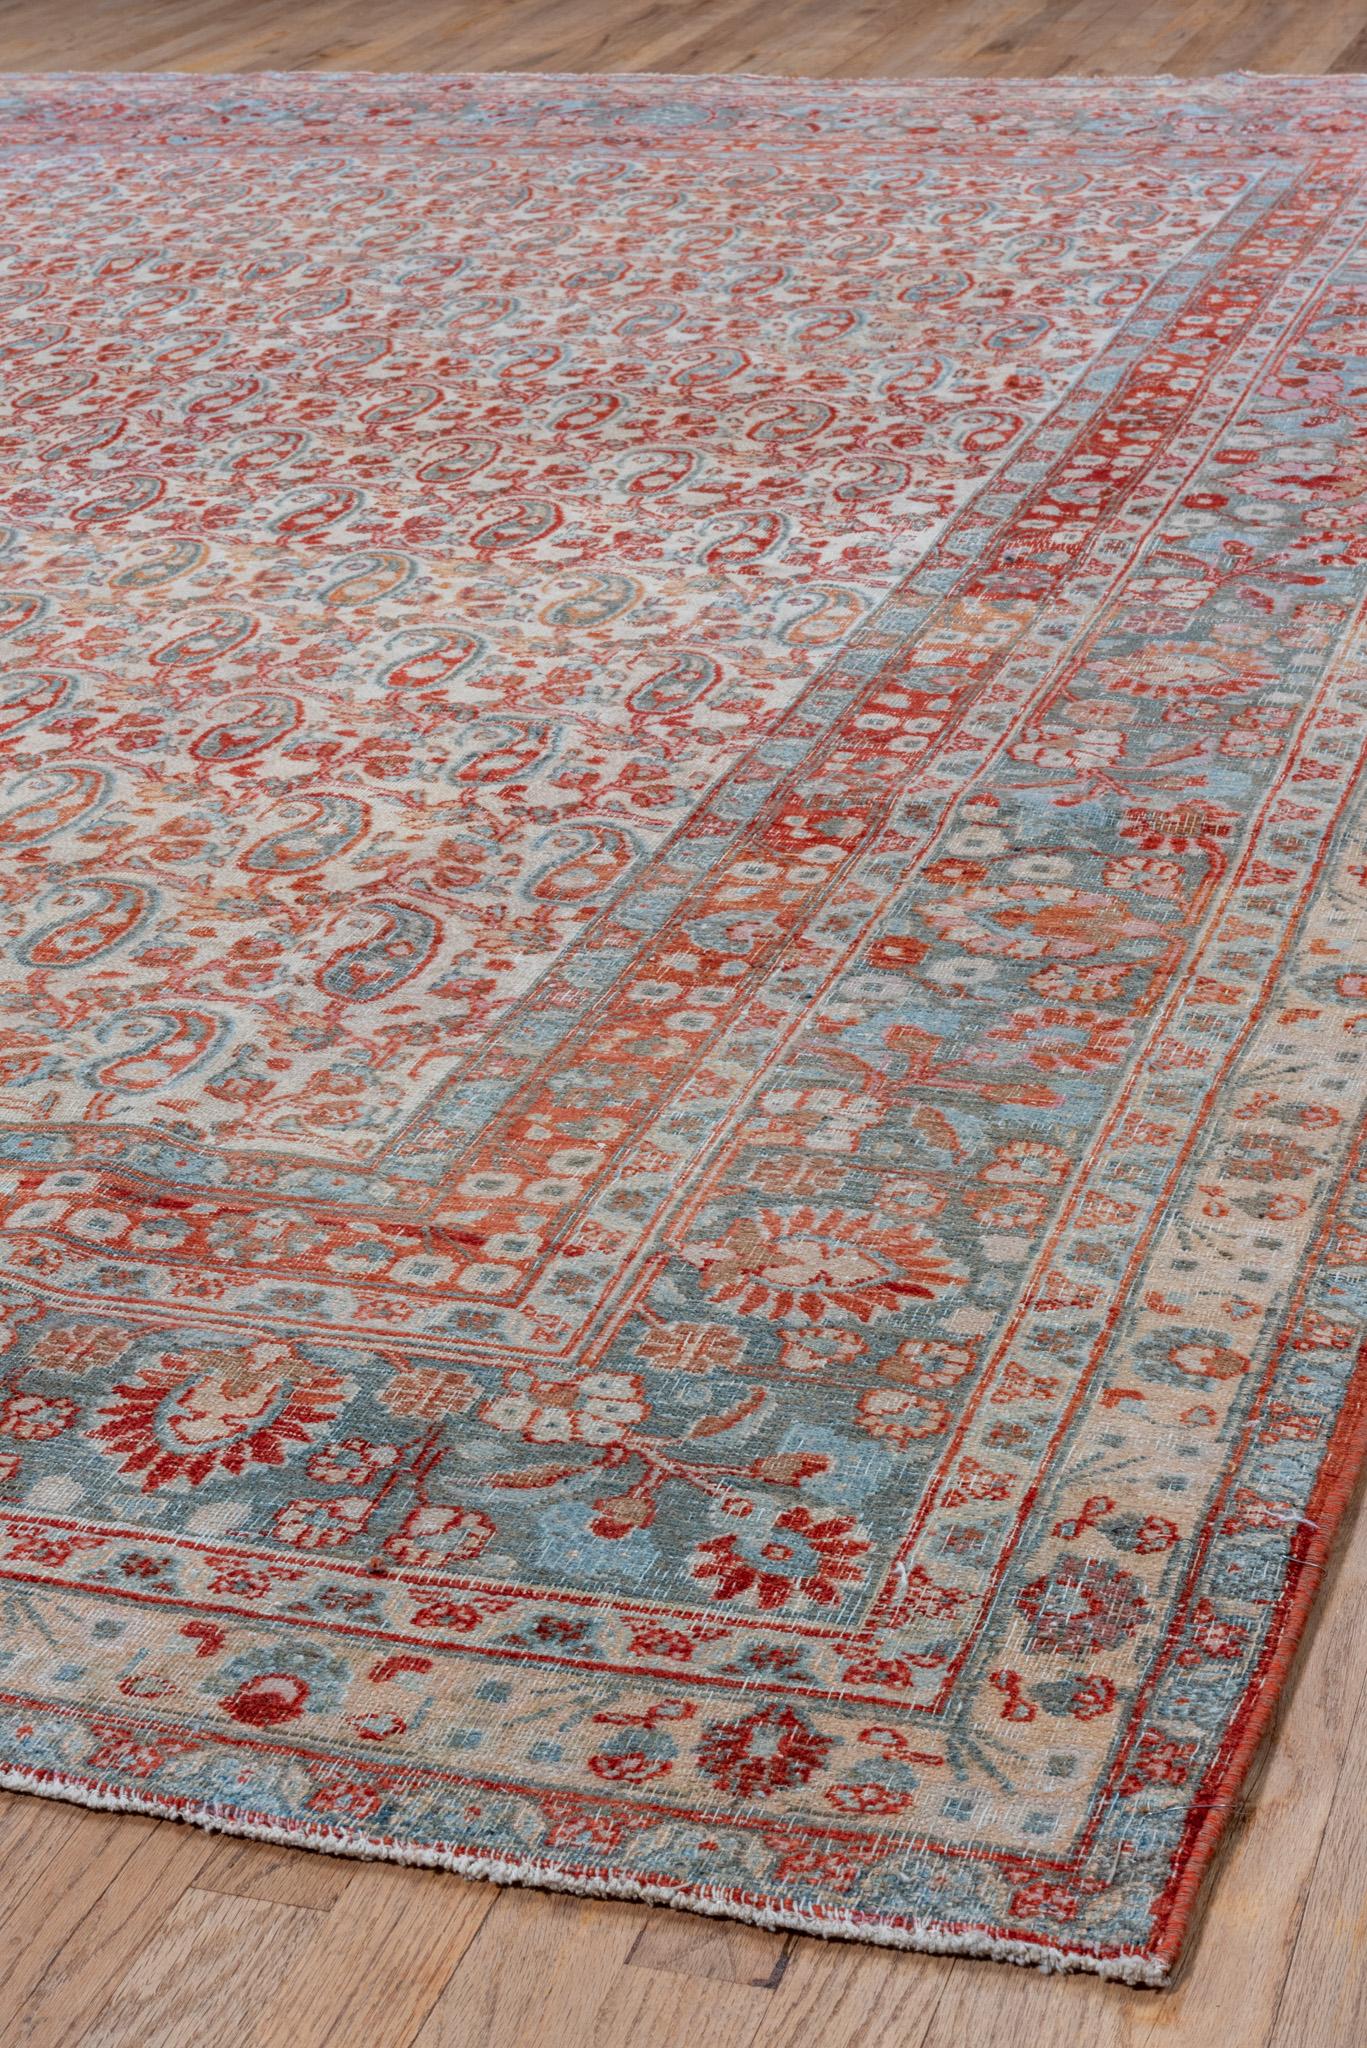 A Meshed Rug circa 1930. Hand knotted, made of 100% wool yarn.